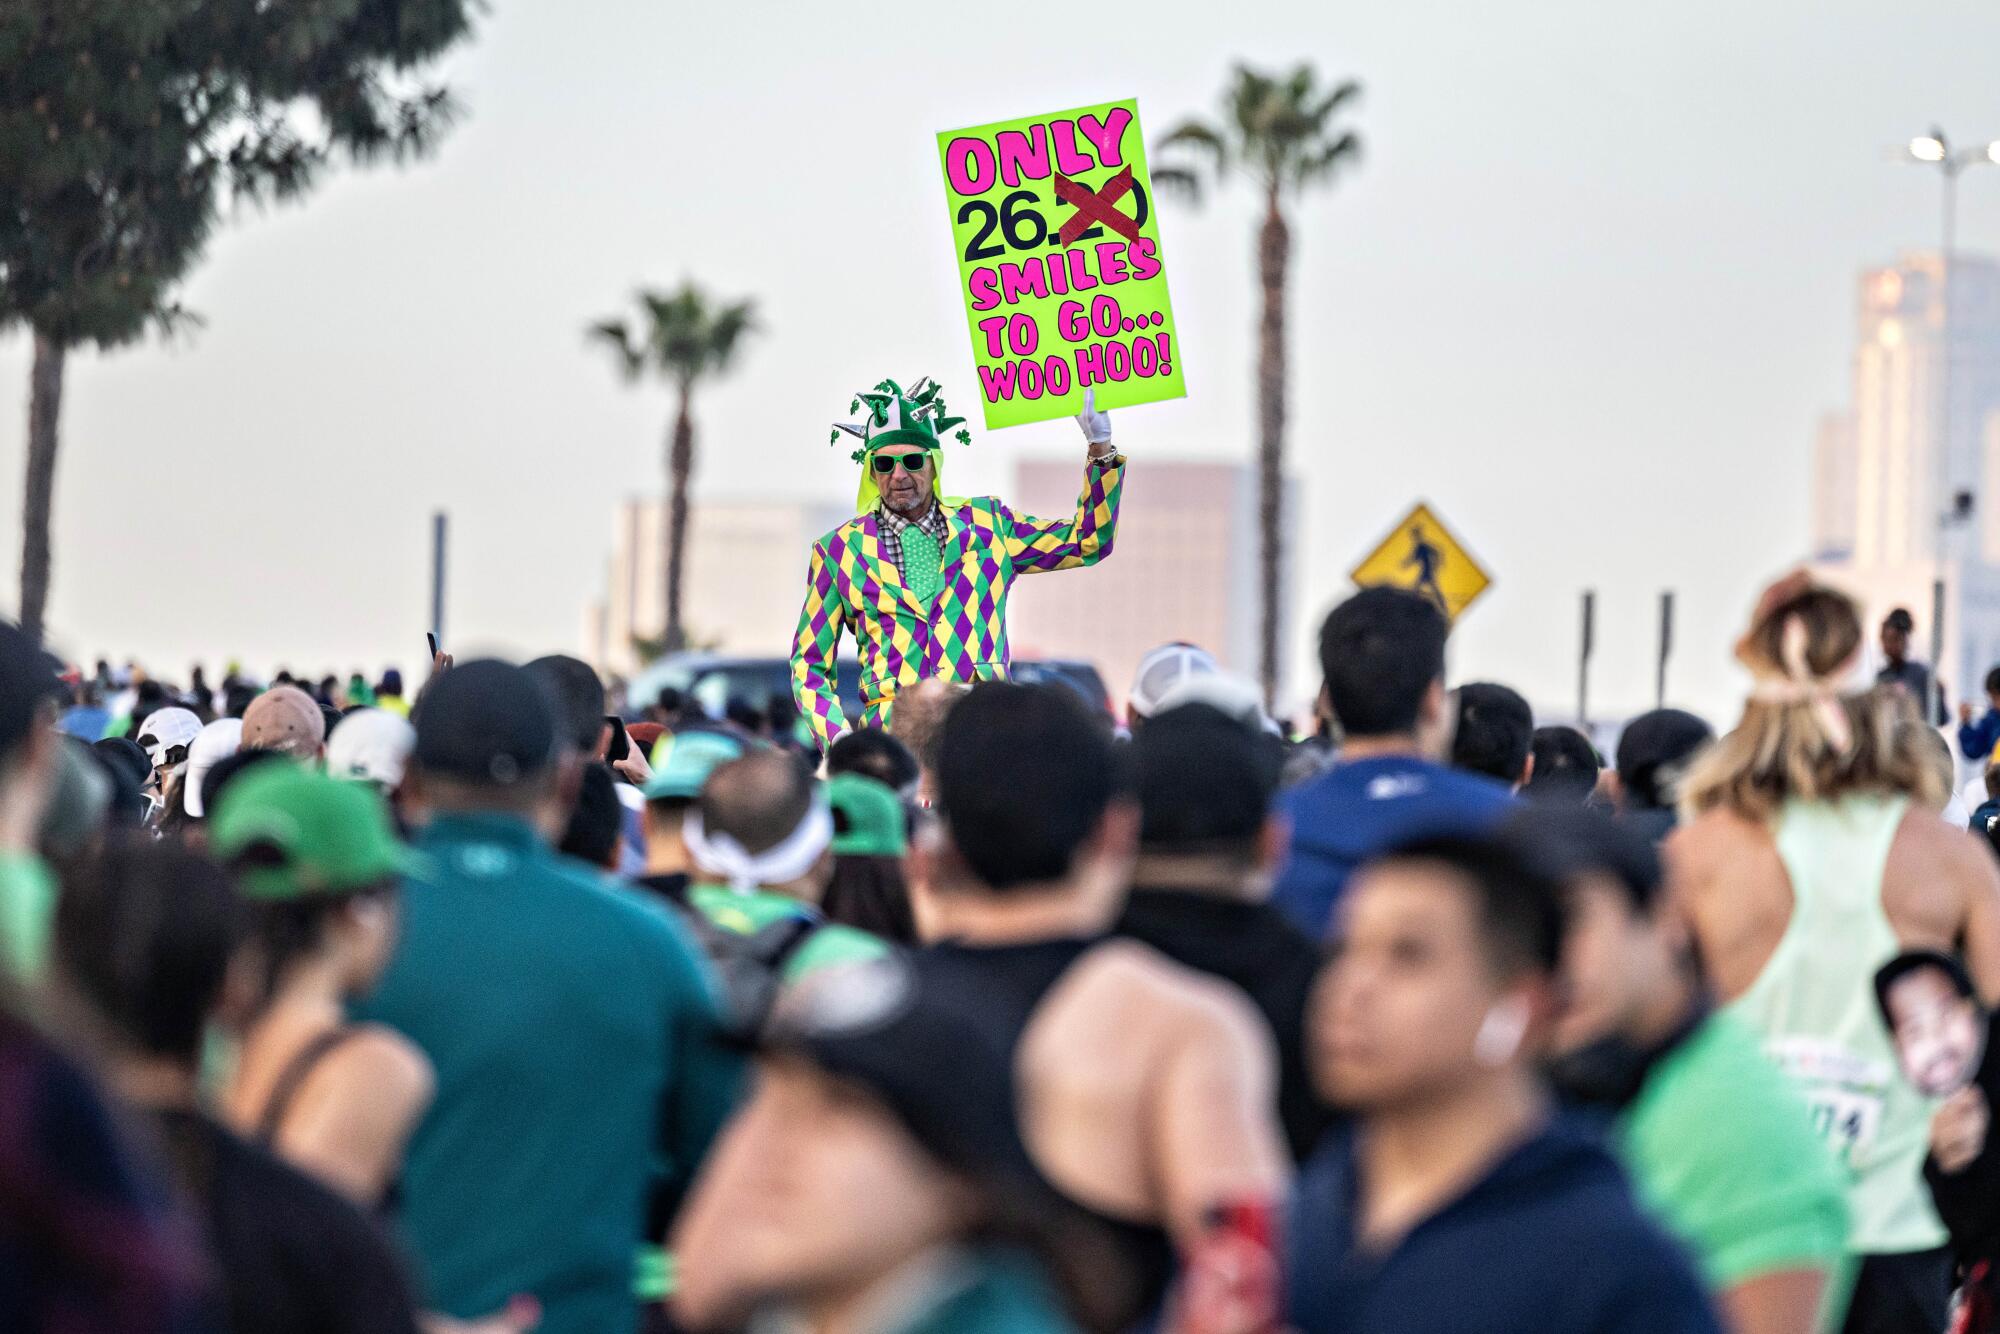 A man holds a sign reading "Only 26.2 Smiles To Go" at the L.A. Marathon.